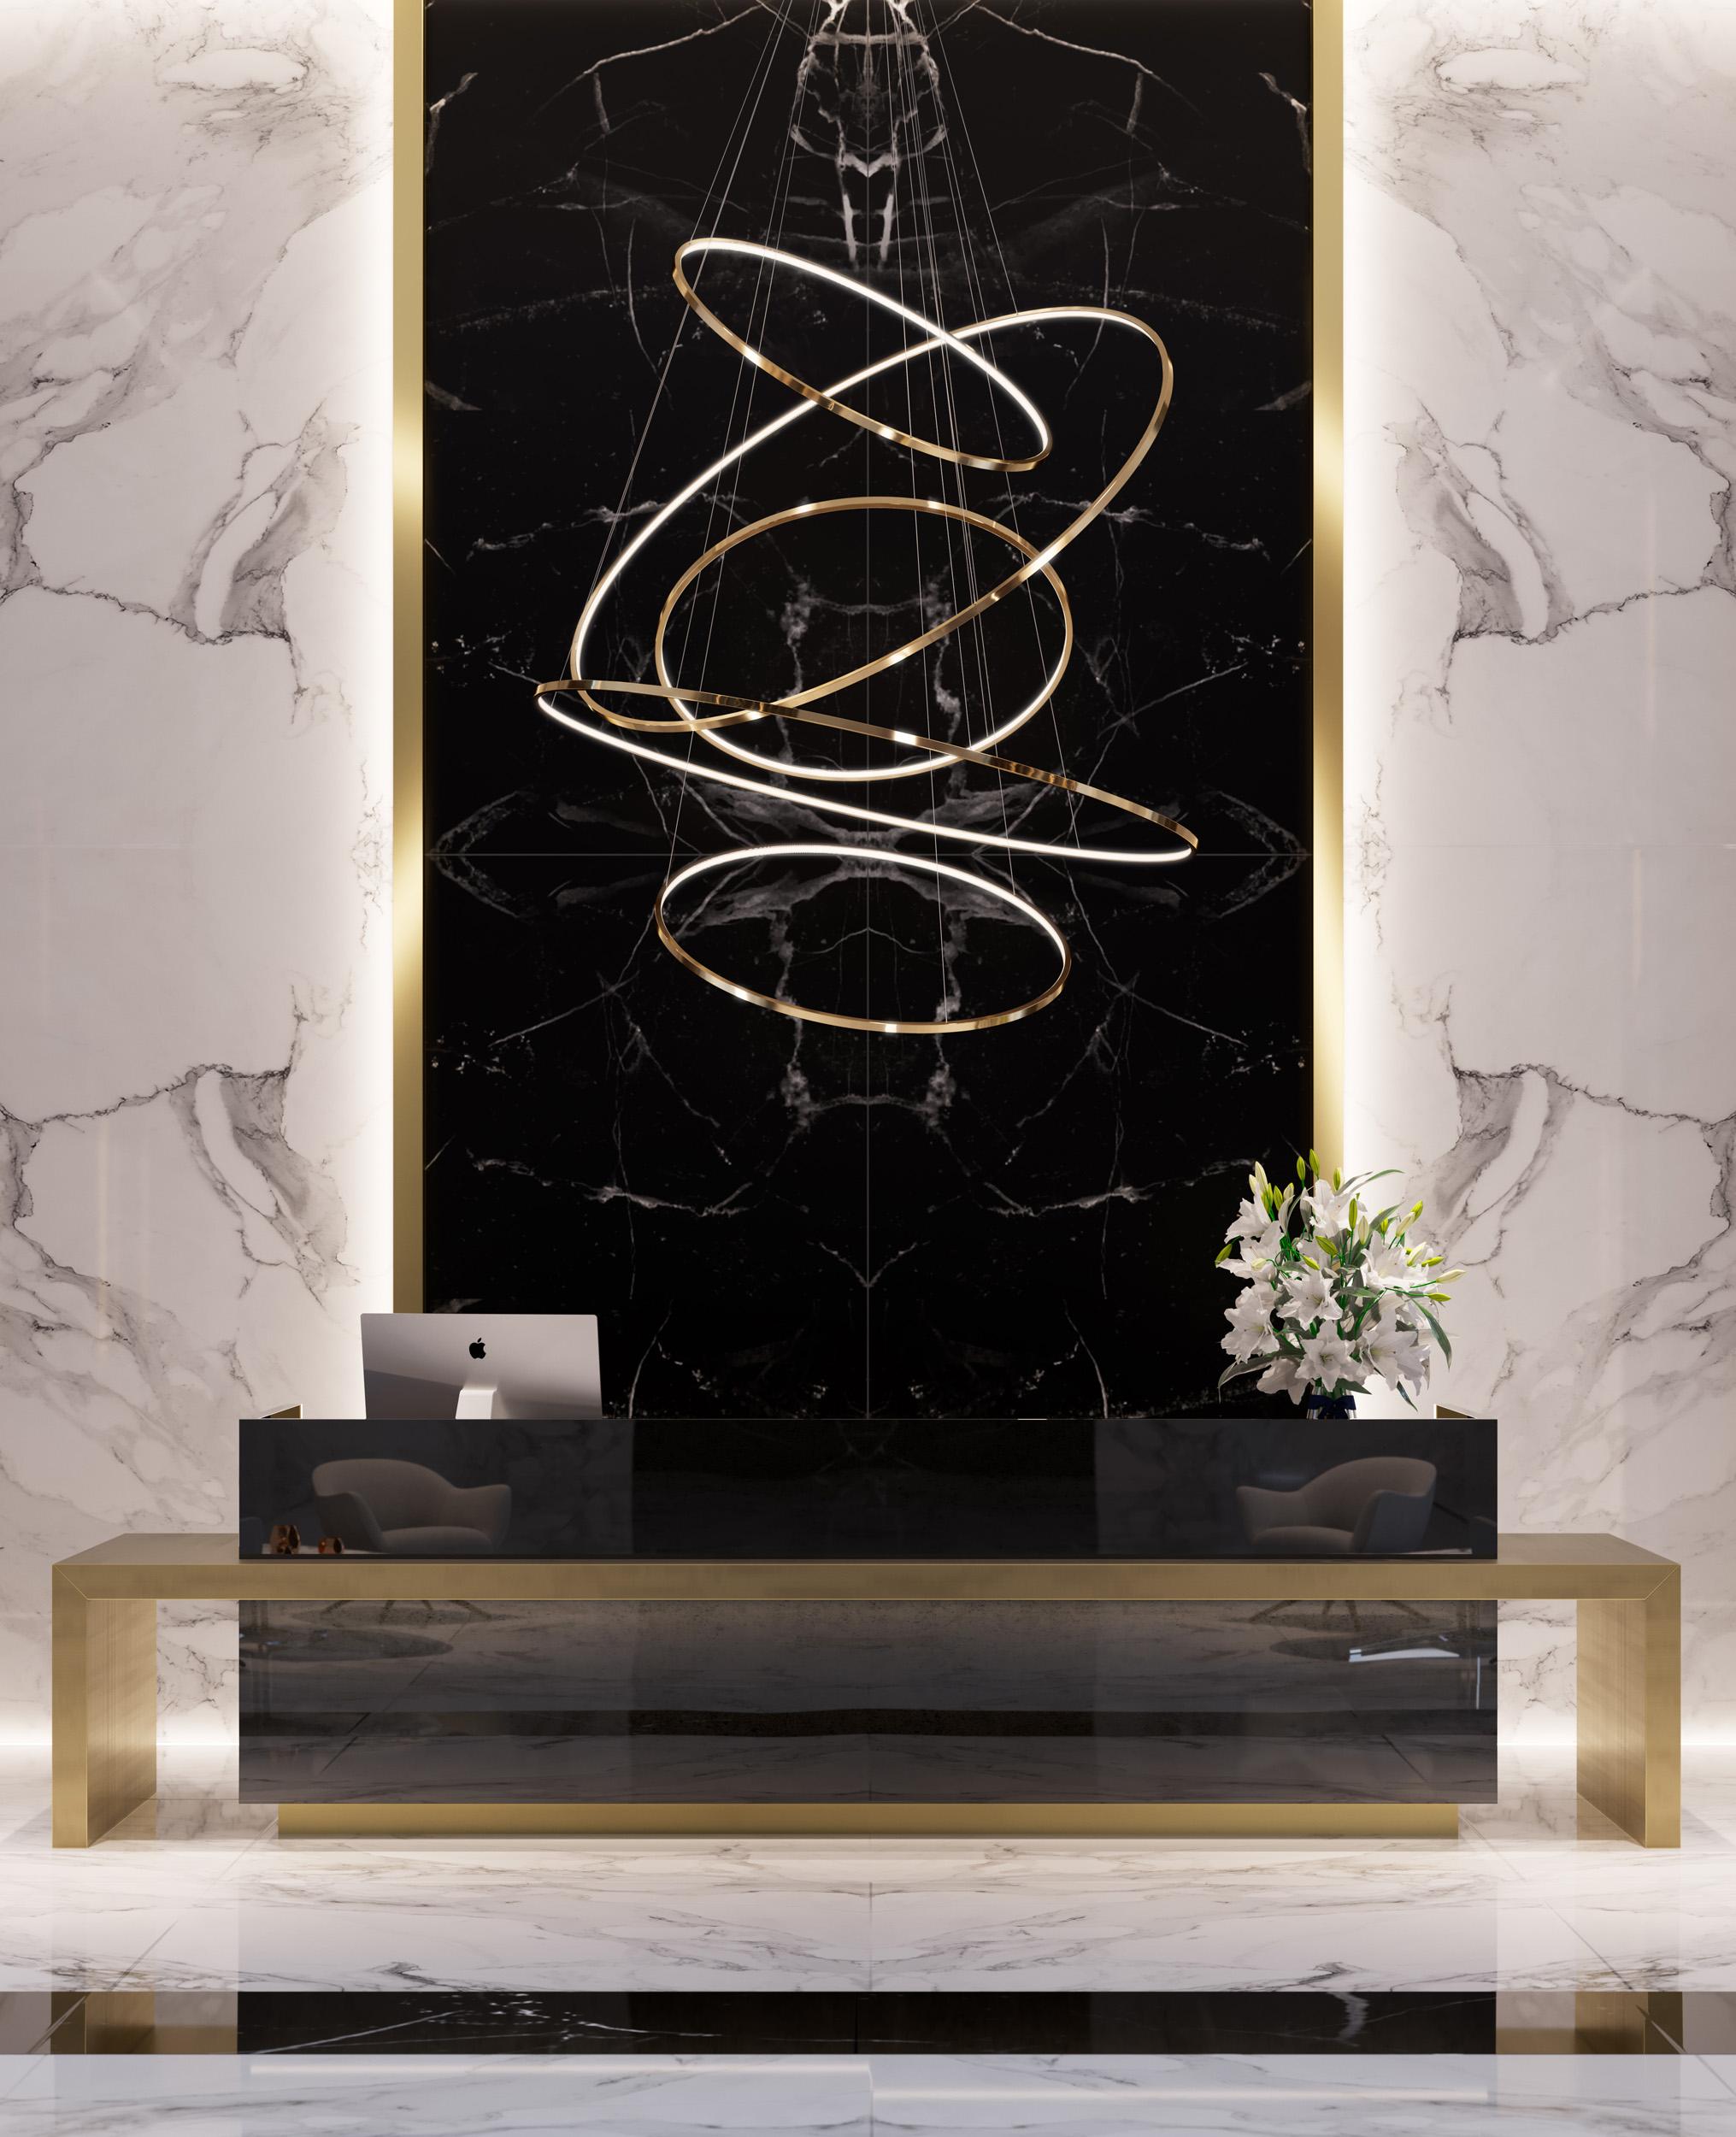 Contemporary circular medium Lohja LED five-ring chandelier in polished brass.

This contemporary chandelier is inspired by the tranquil lakes of Lohja, Finland, to explore peace, breath and balance. The Lohja brings clarity to high-ceiling rooms,